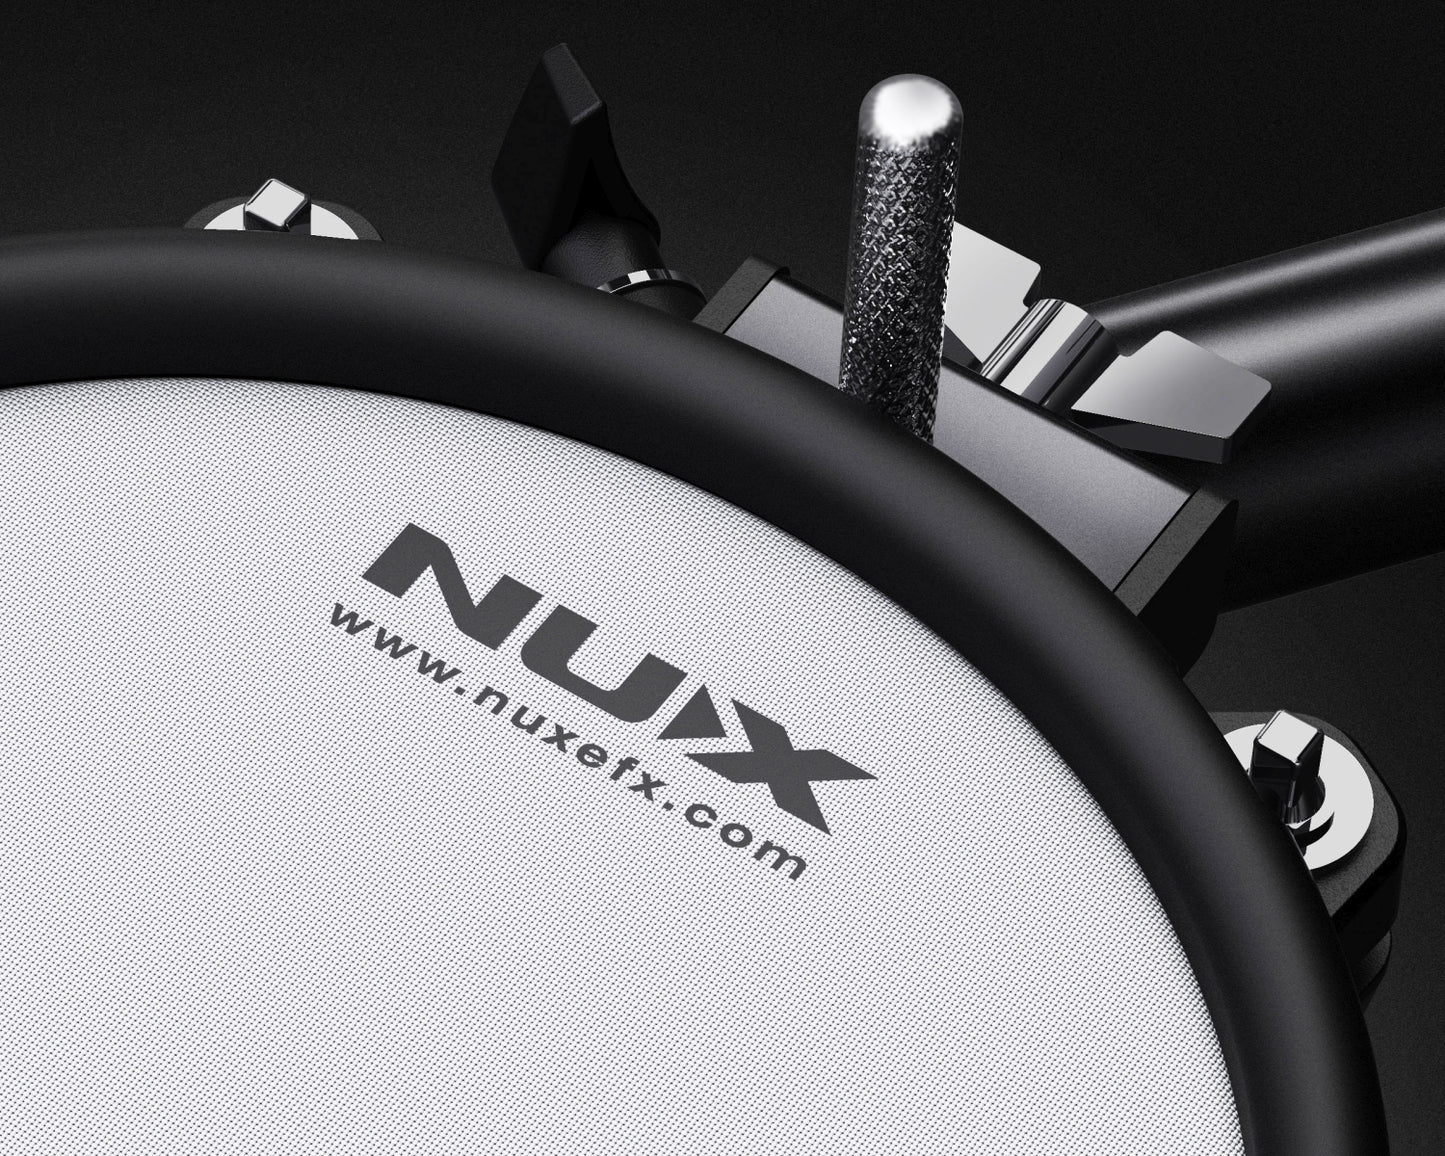 NUX DM-210 limited pack